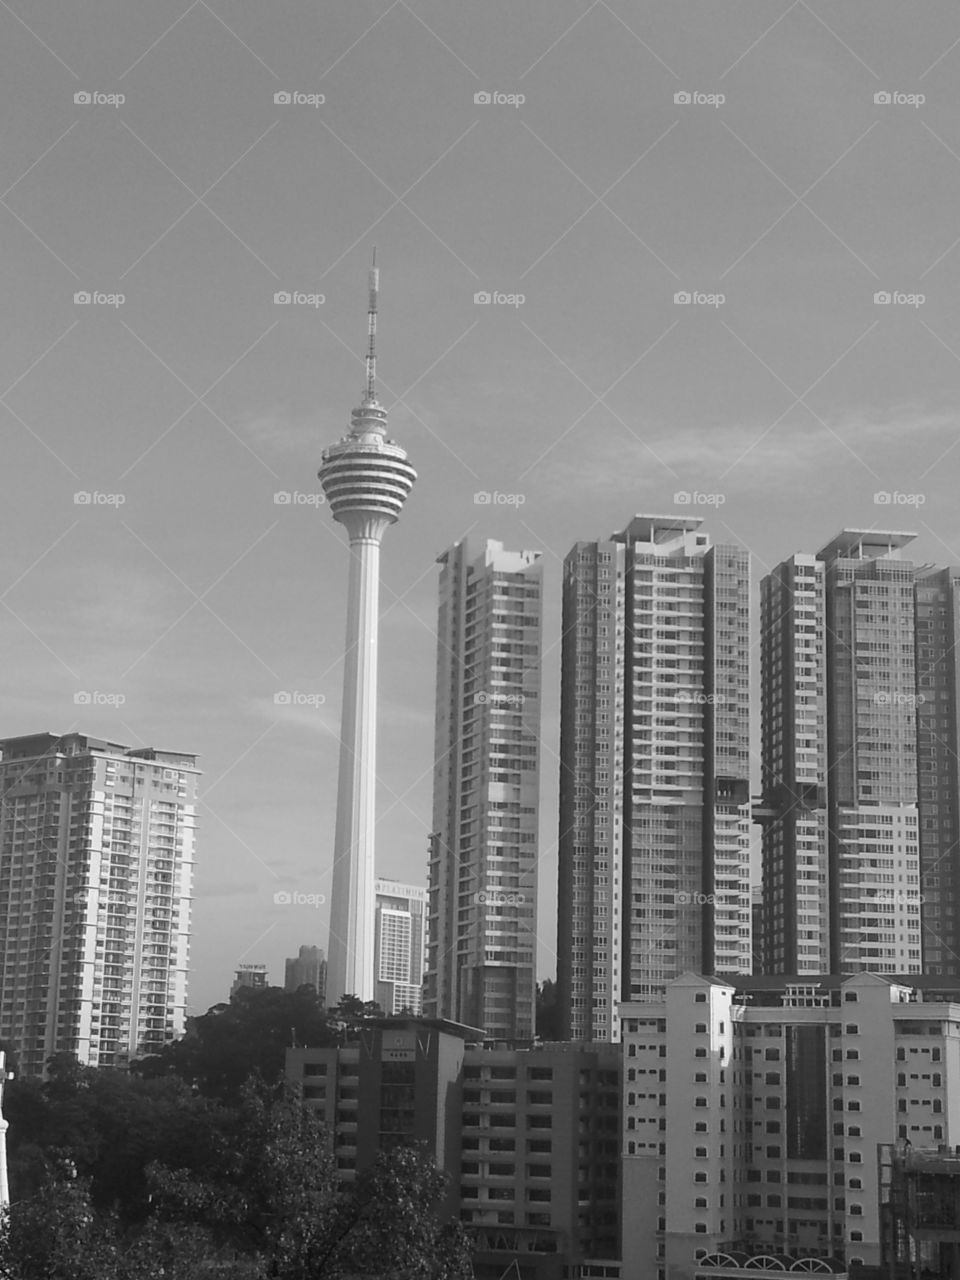 black and white. The KL Tower in black and white